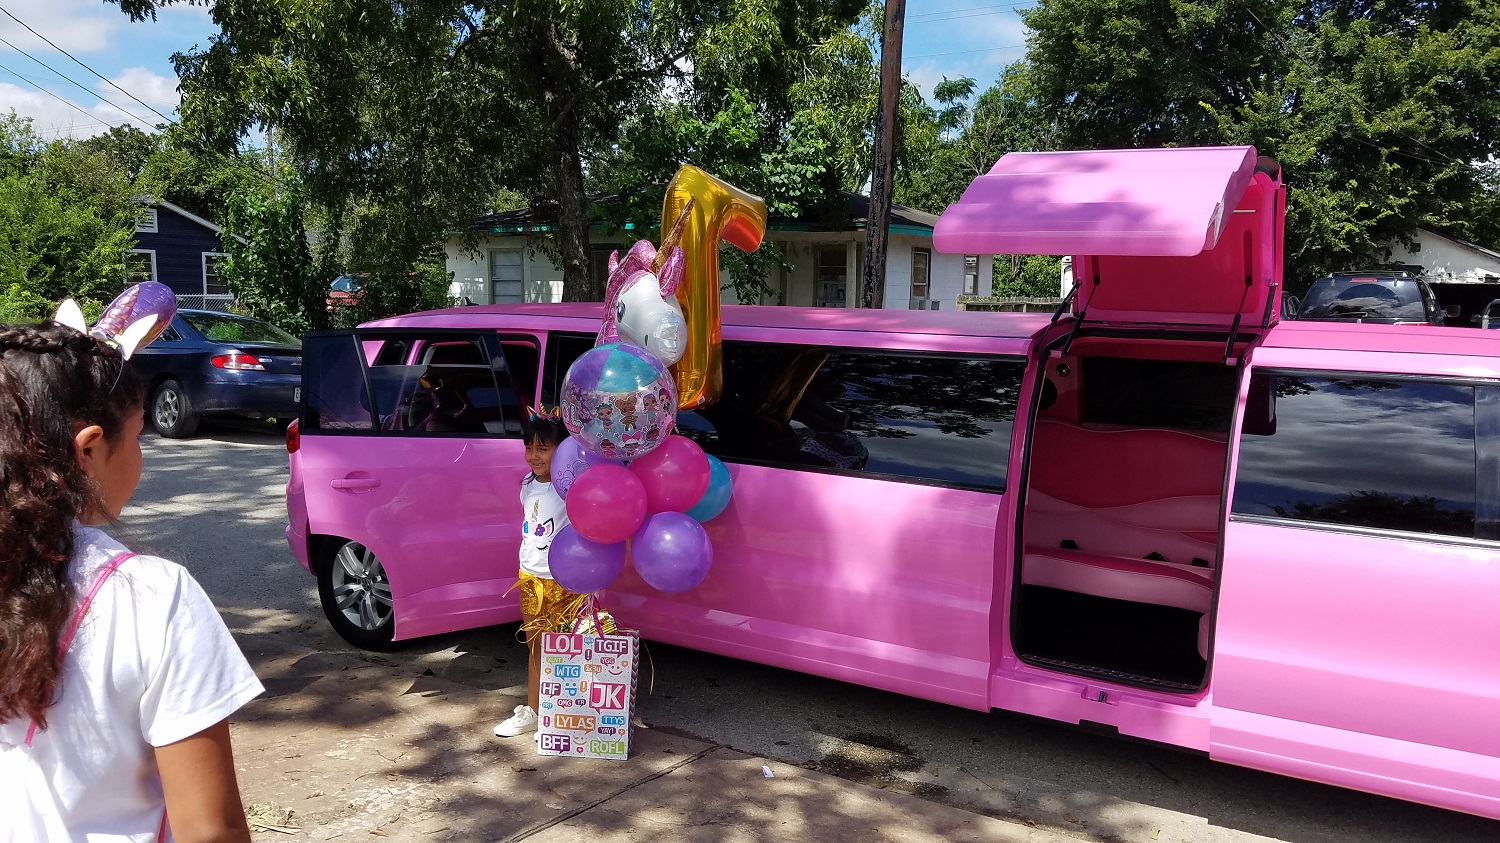 SURPRISE ME WITH PINK LIMO